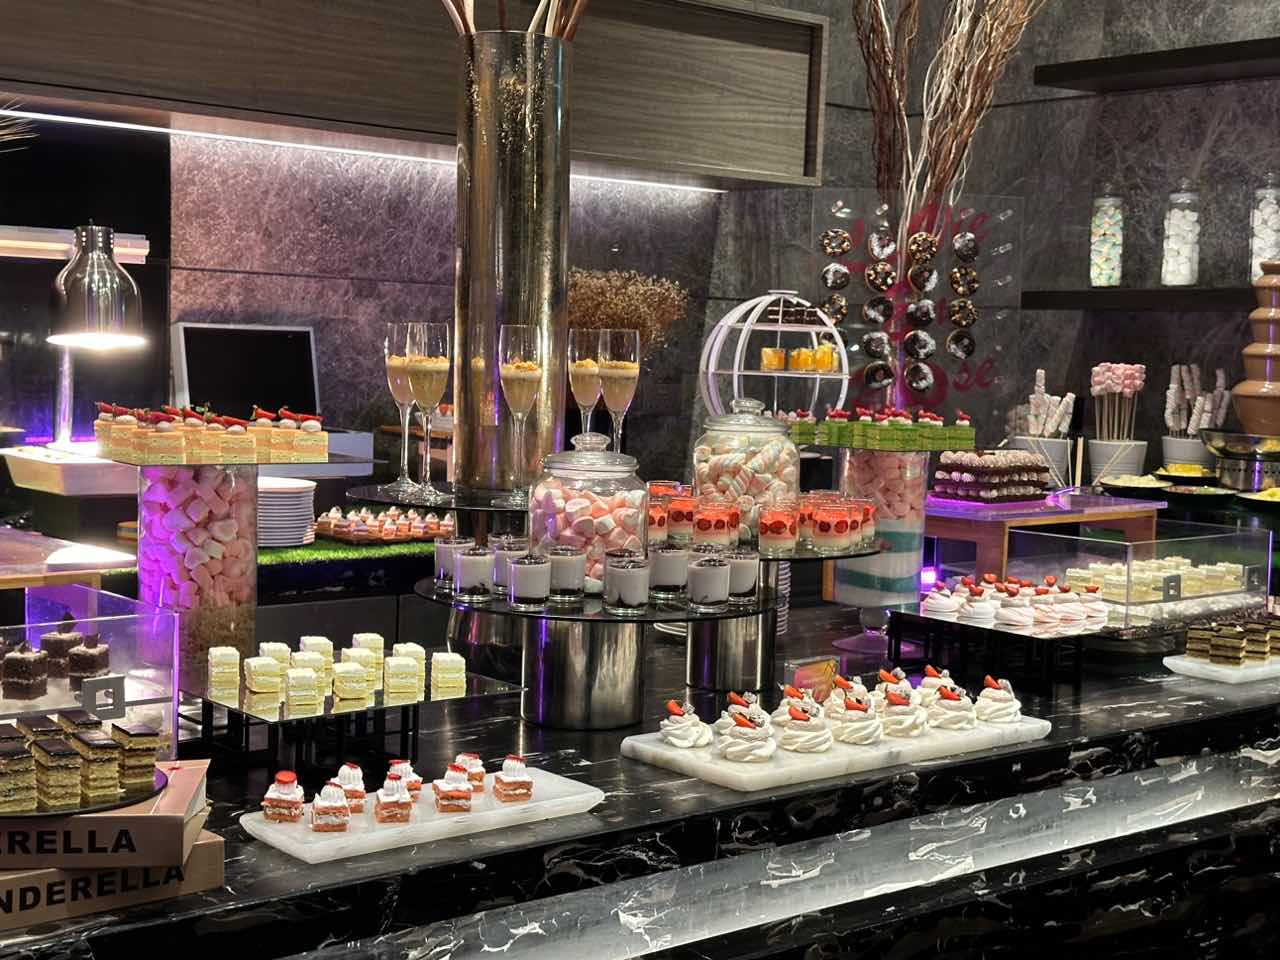 So many desserts in a buffet setting